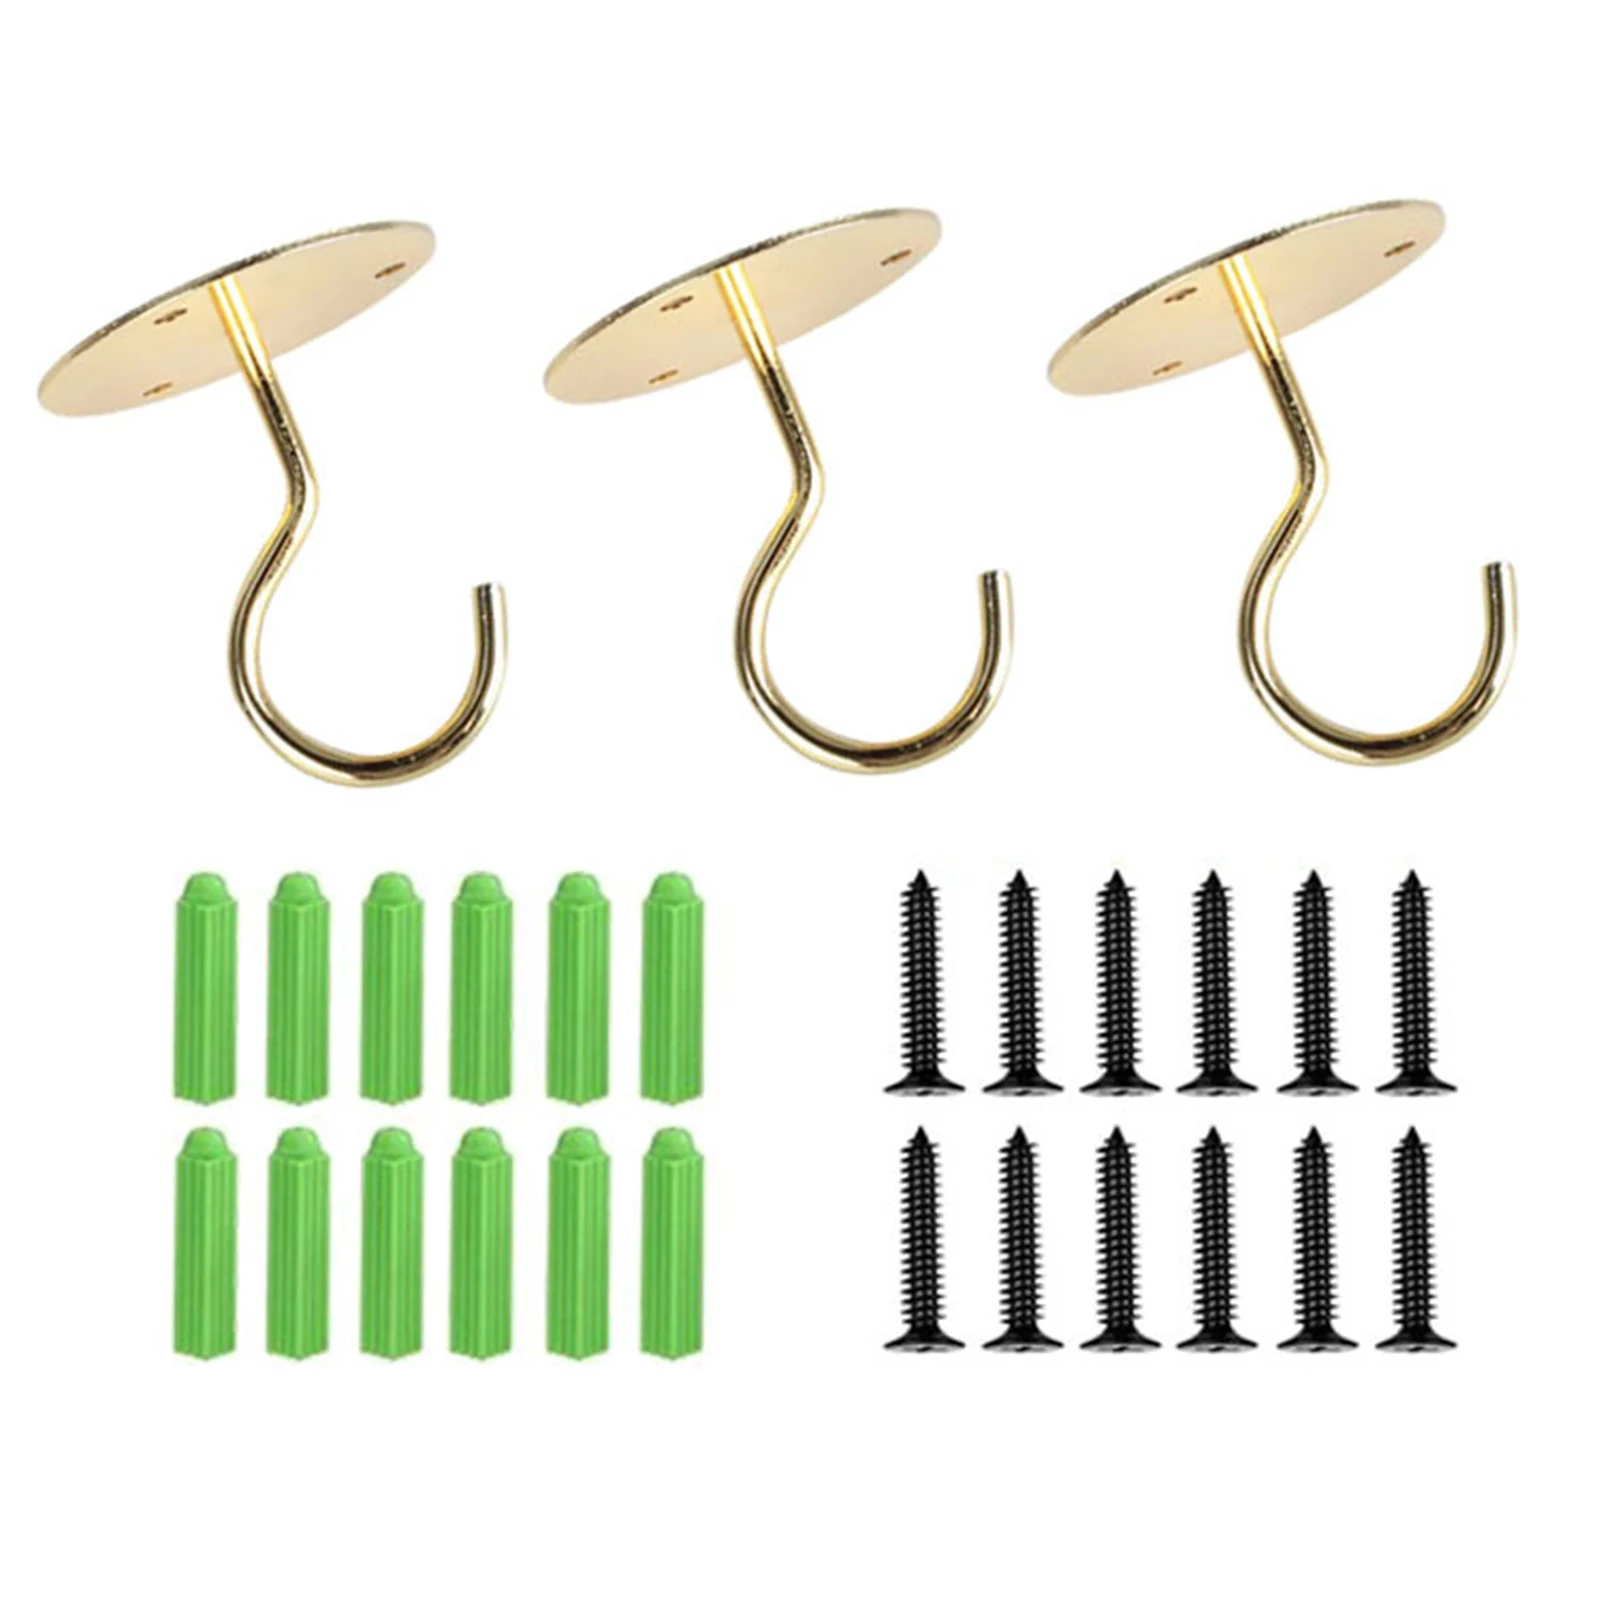 Screw-in Wall Holder Hooks Wall Ceiling Planter Hanging Hook for  Lanterns Wind Chimes Planters